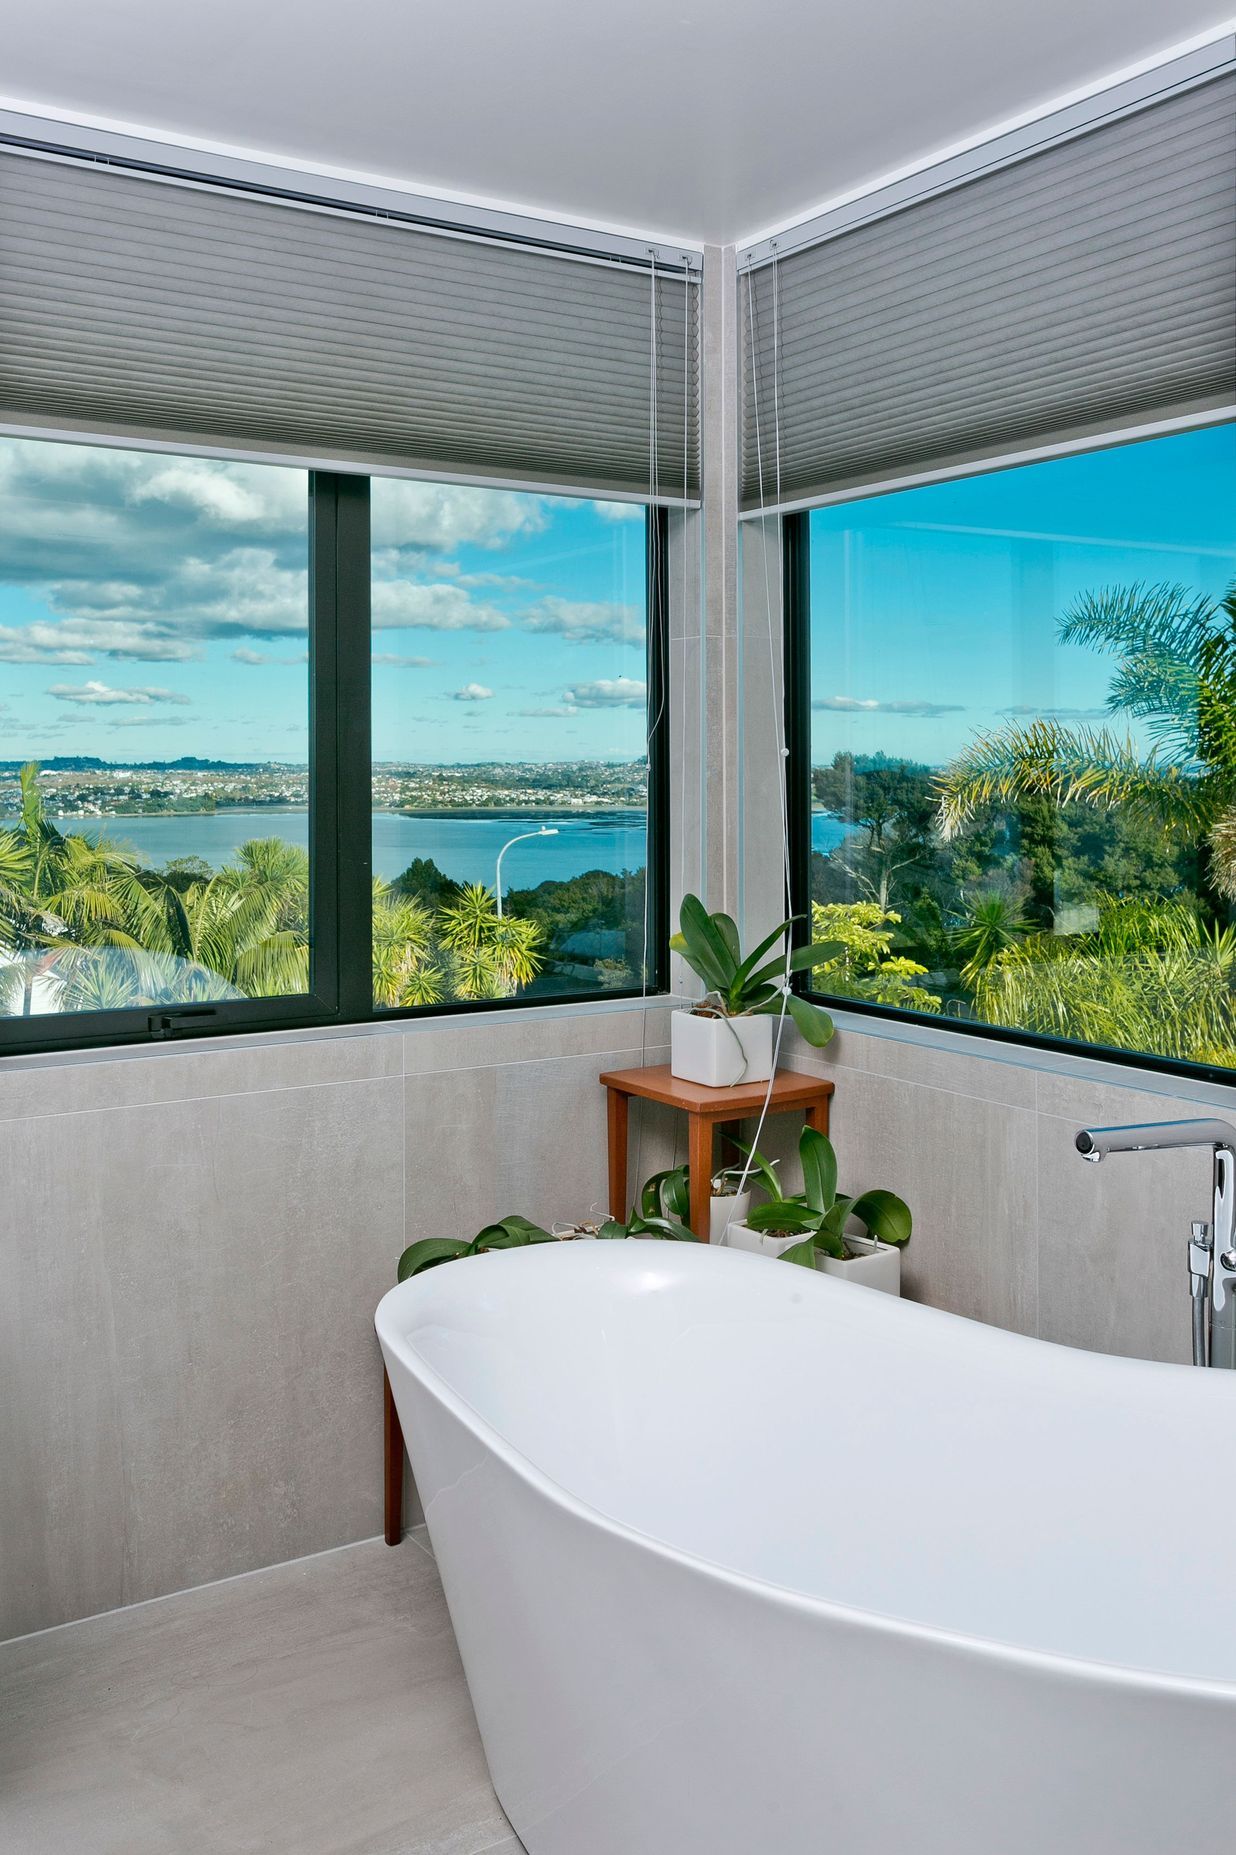 Double aspect windows provide an enviable view back across the harbour, to be enjoyed from the slipper bathtub.